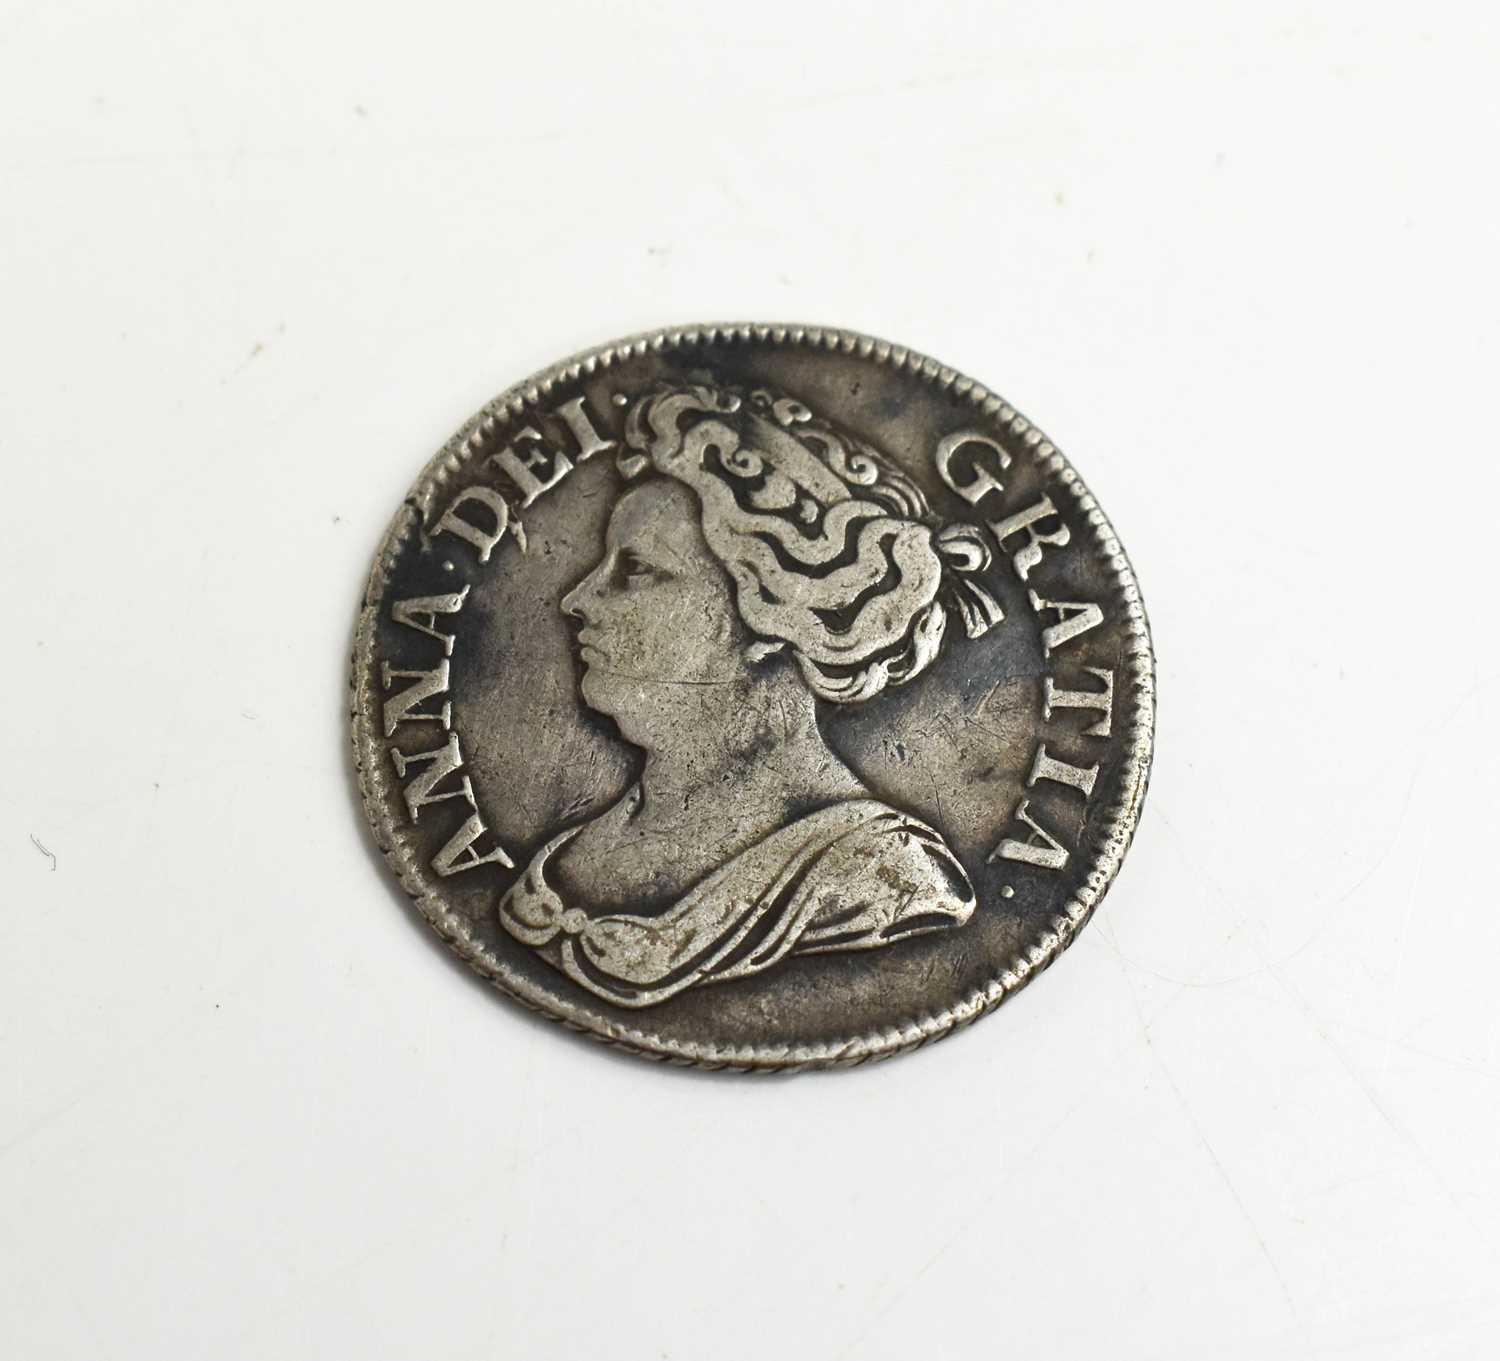 A Queen Anne silver milled shilling dated 1711.